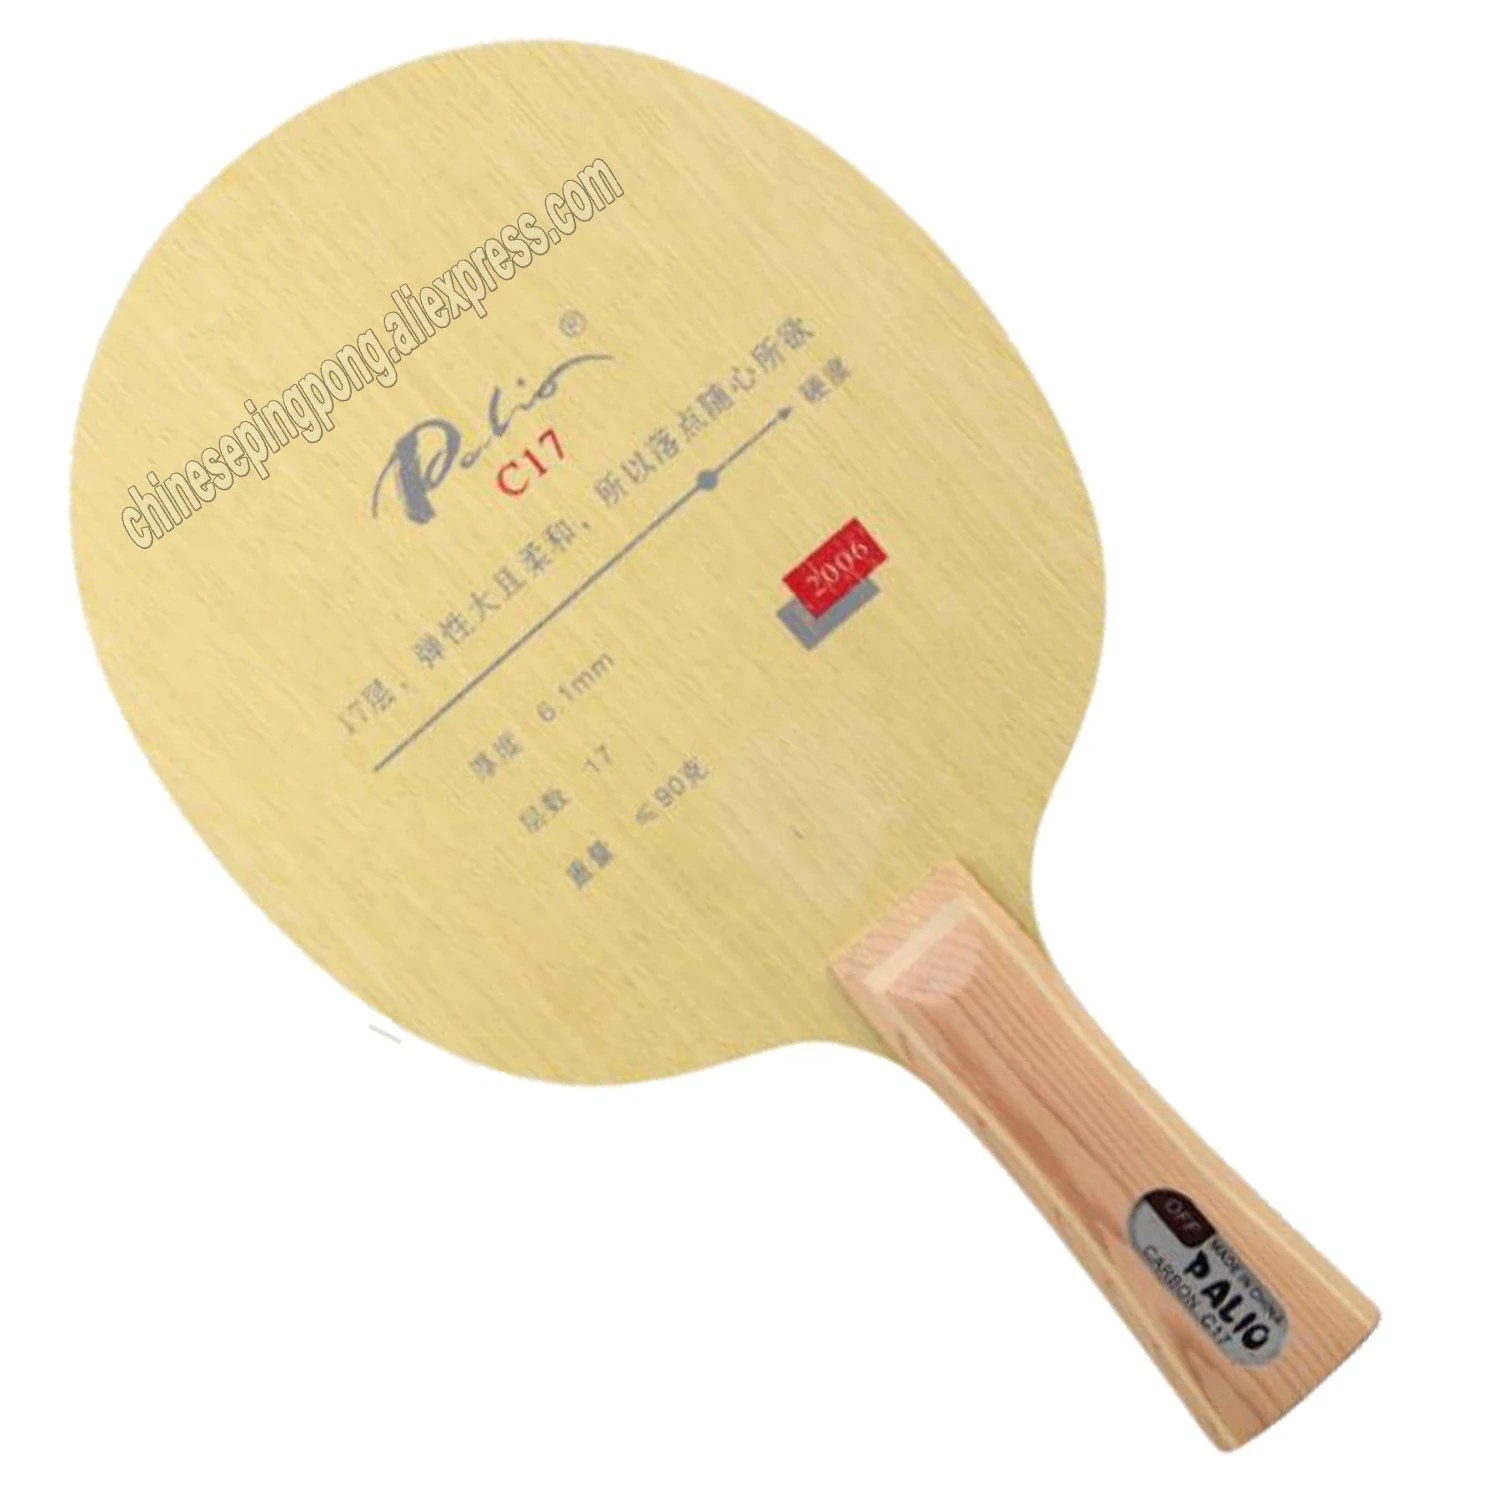 

Original Palio C17 C 17, C-17 ply 17 table tennis blade for fast attack table tennis rackets racquet sports pingpong paddles